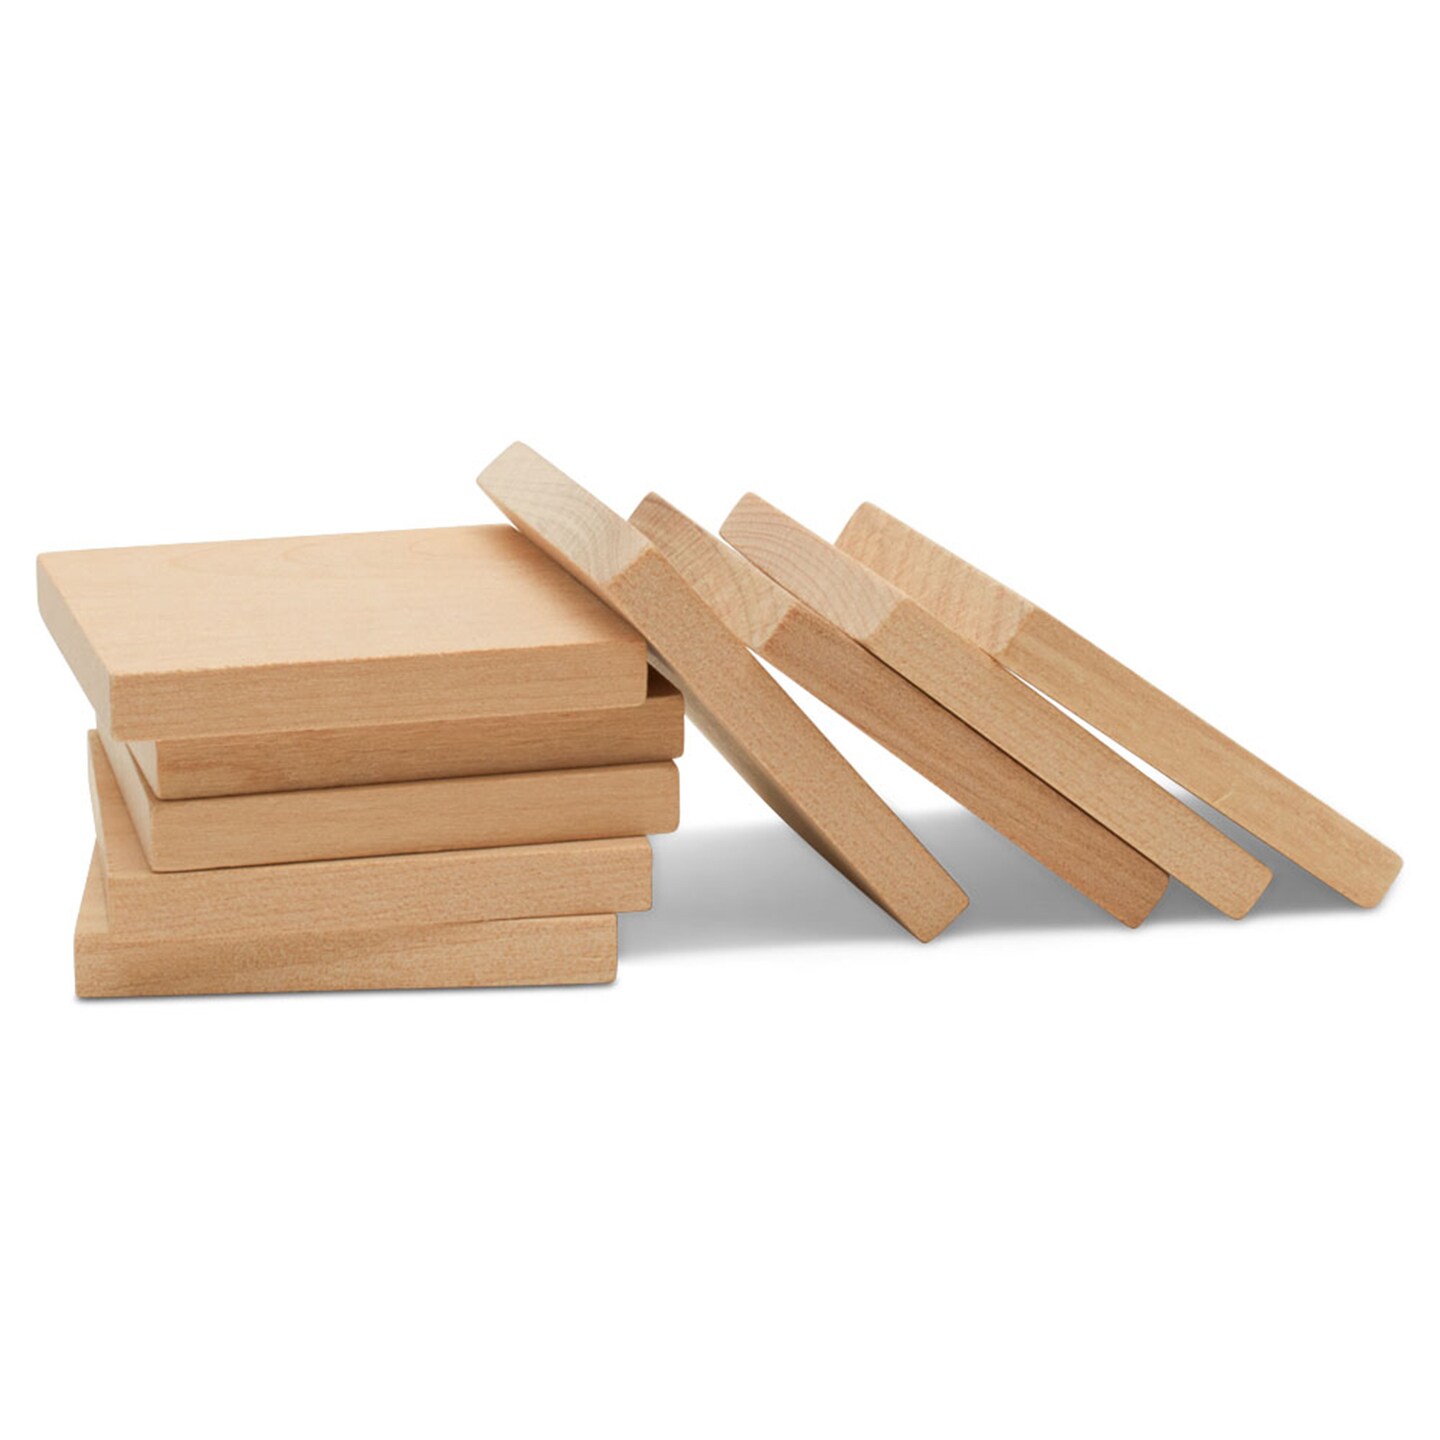 Wood Tiles, Multiple Sizes Available, Blank Wood Squares for Crafts | Woodpeckers